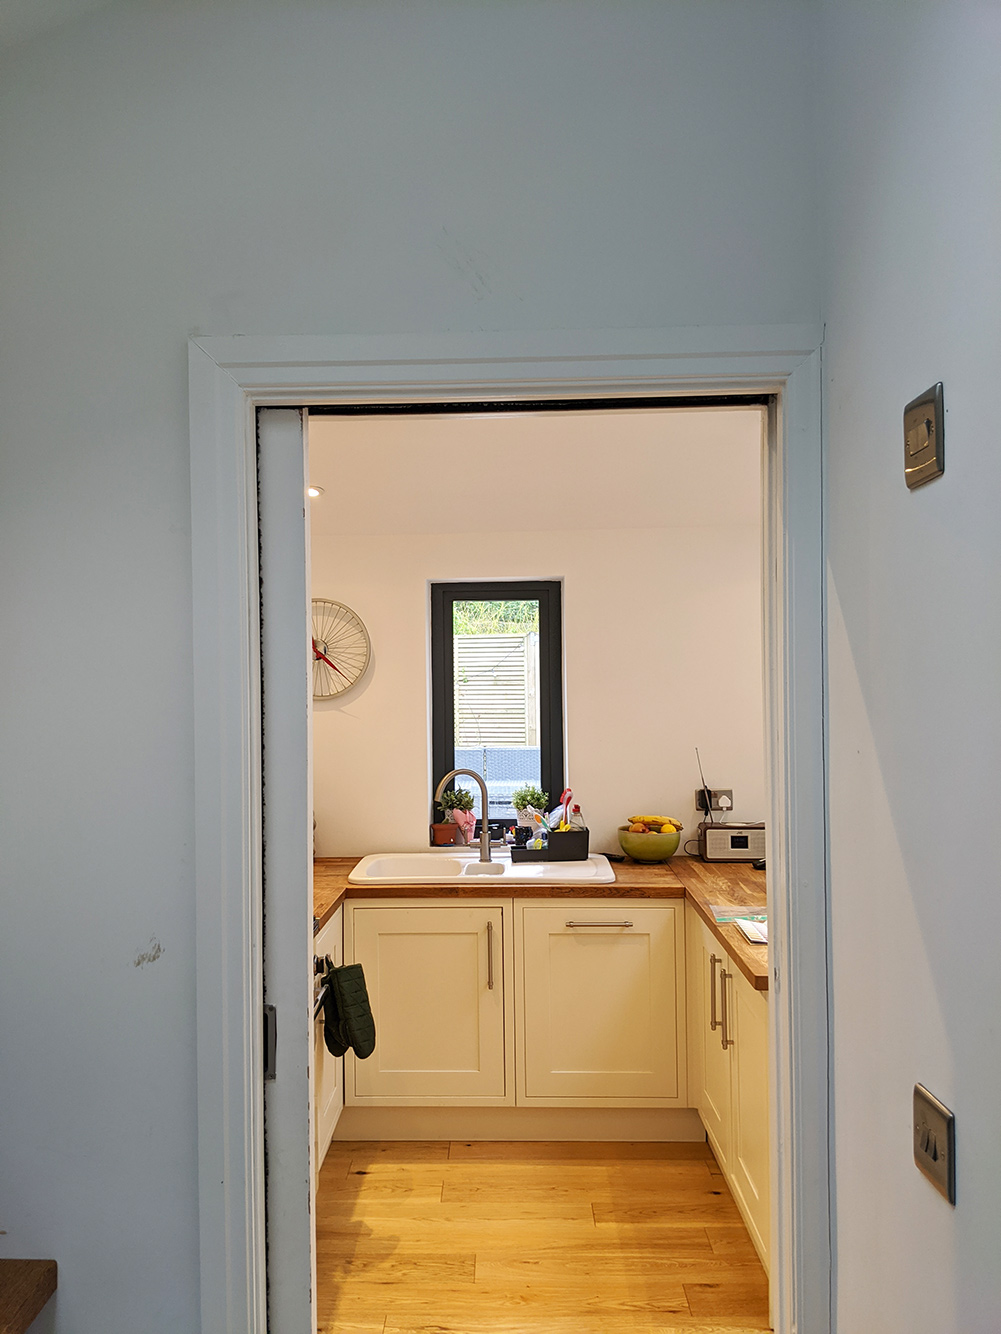 A photo showing the view from the pantry to the kitchen